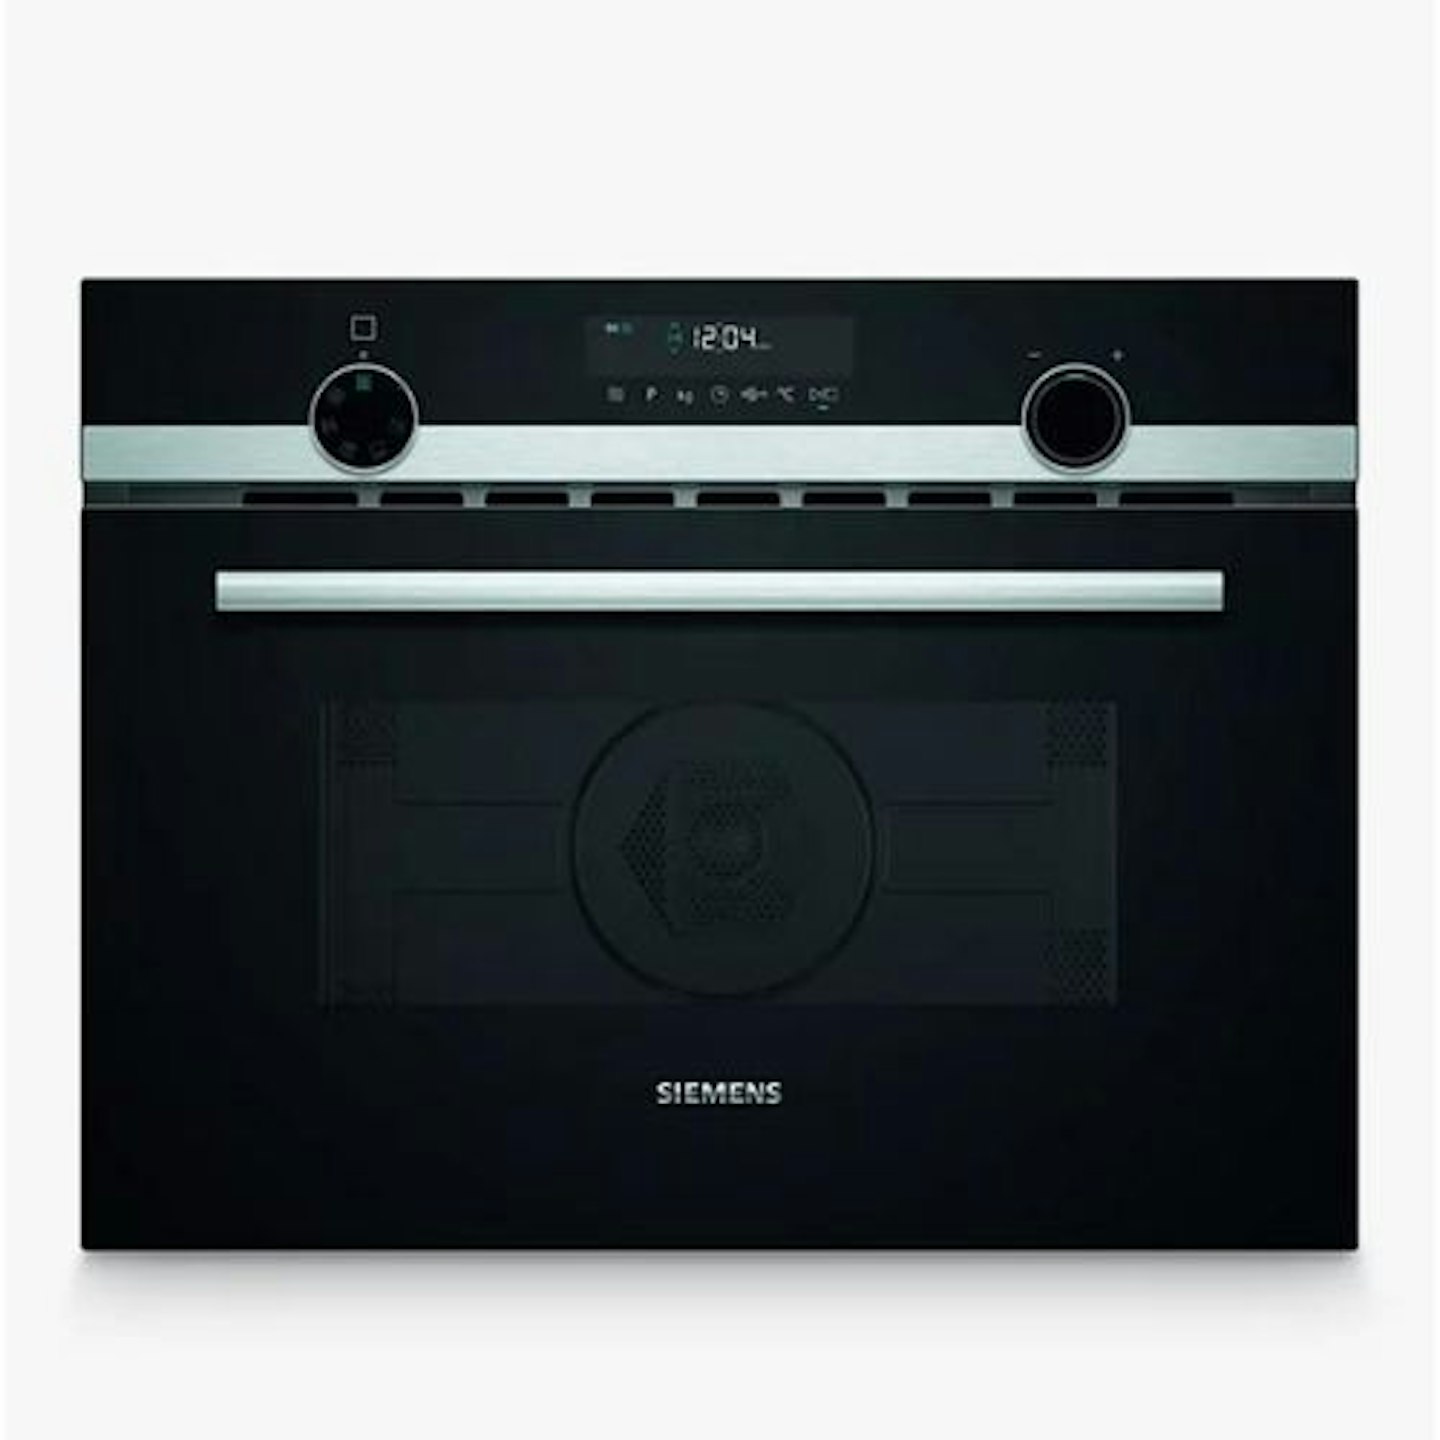 ✓AEG Built-in Combi Microwave Oven with Grill-Micromat-Duo A71CS10V✓